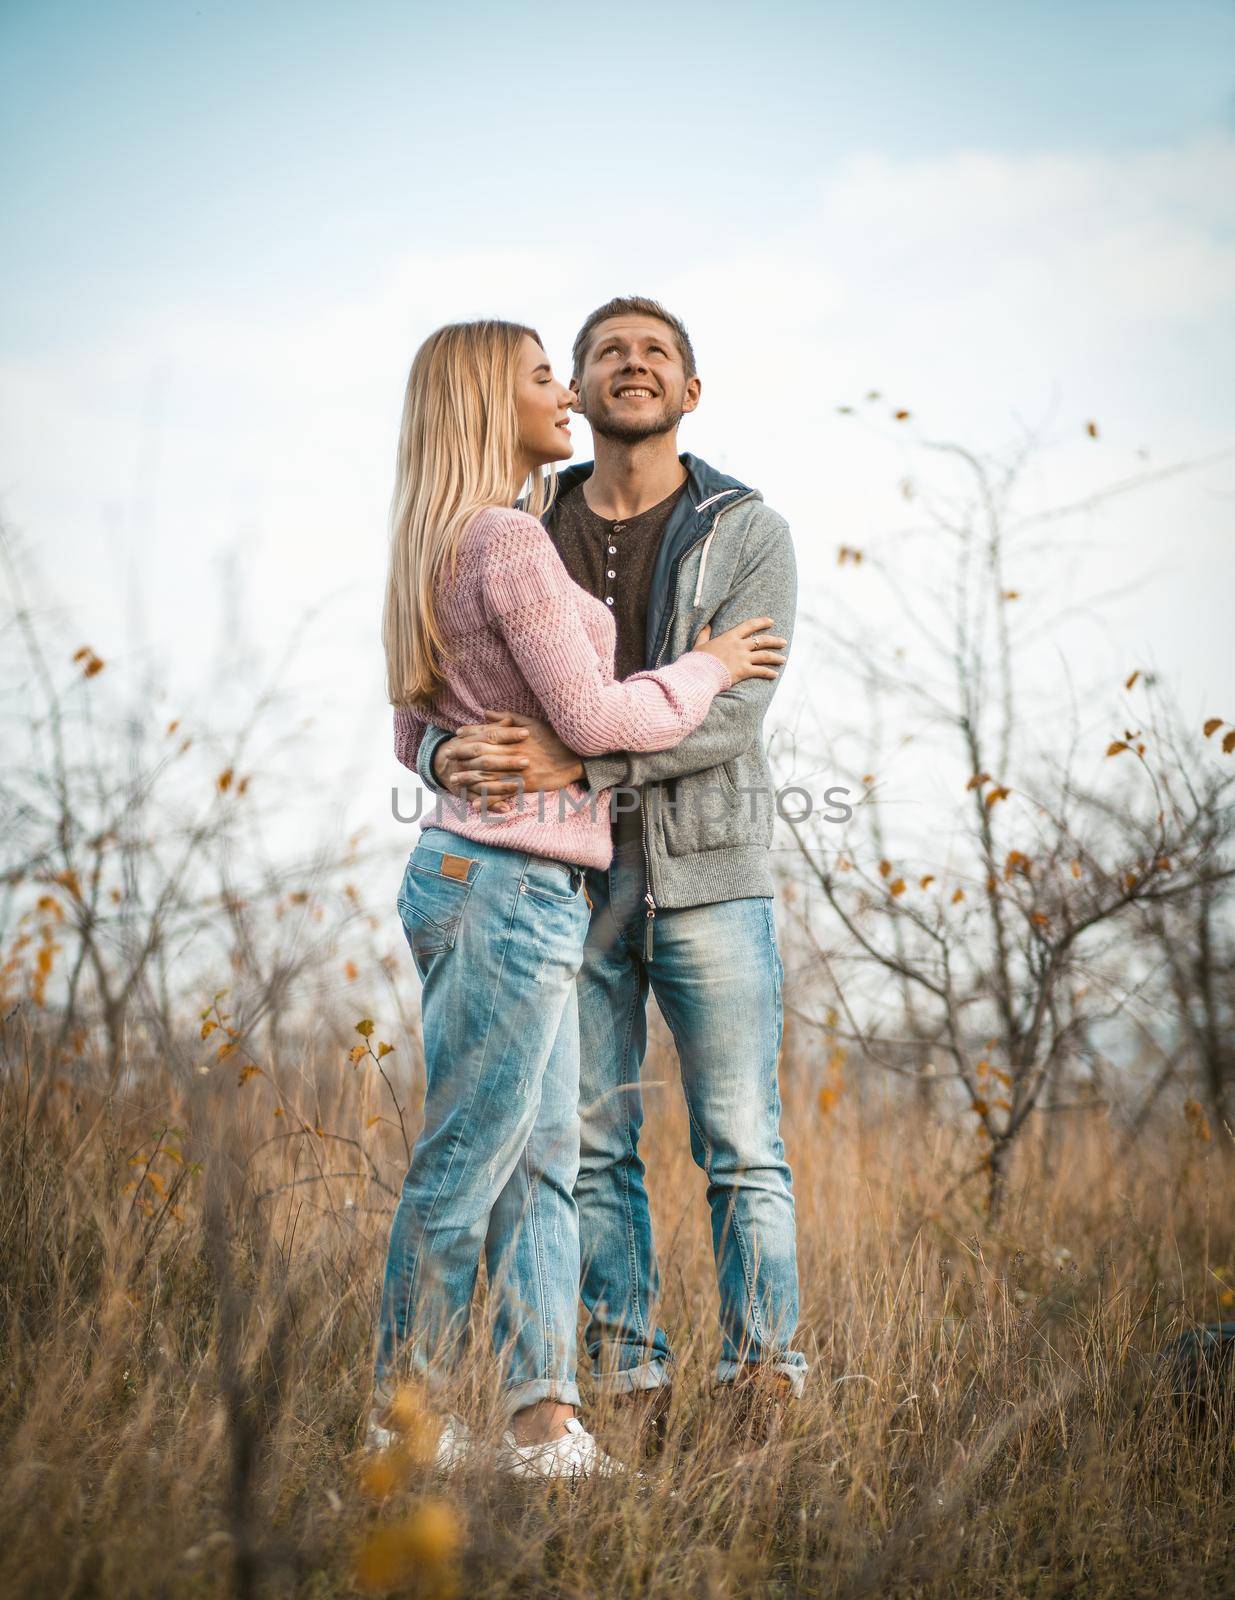 Man And Woman Stands Embracing On Grass Outdoors by LipikStockMedia